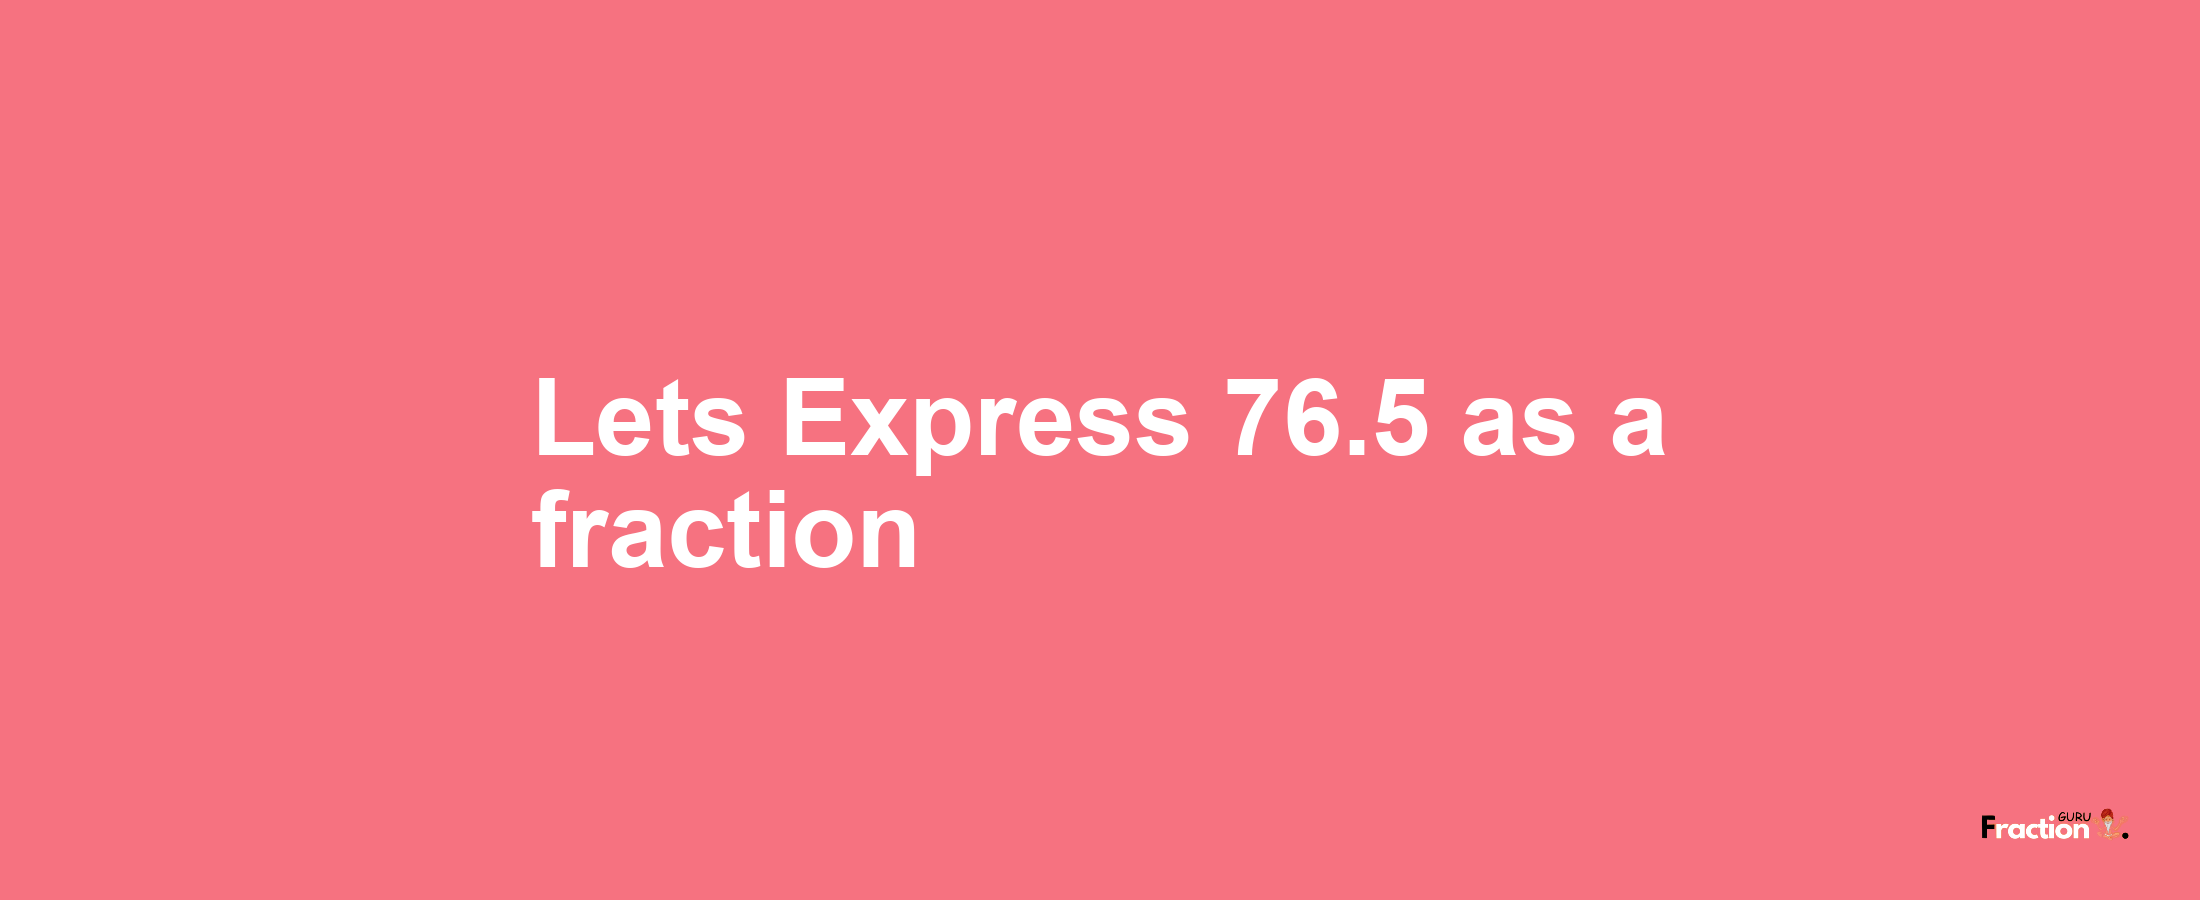 Lets Express 76.5 as afraction